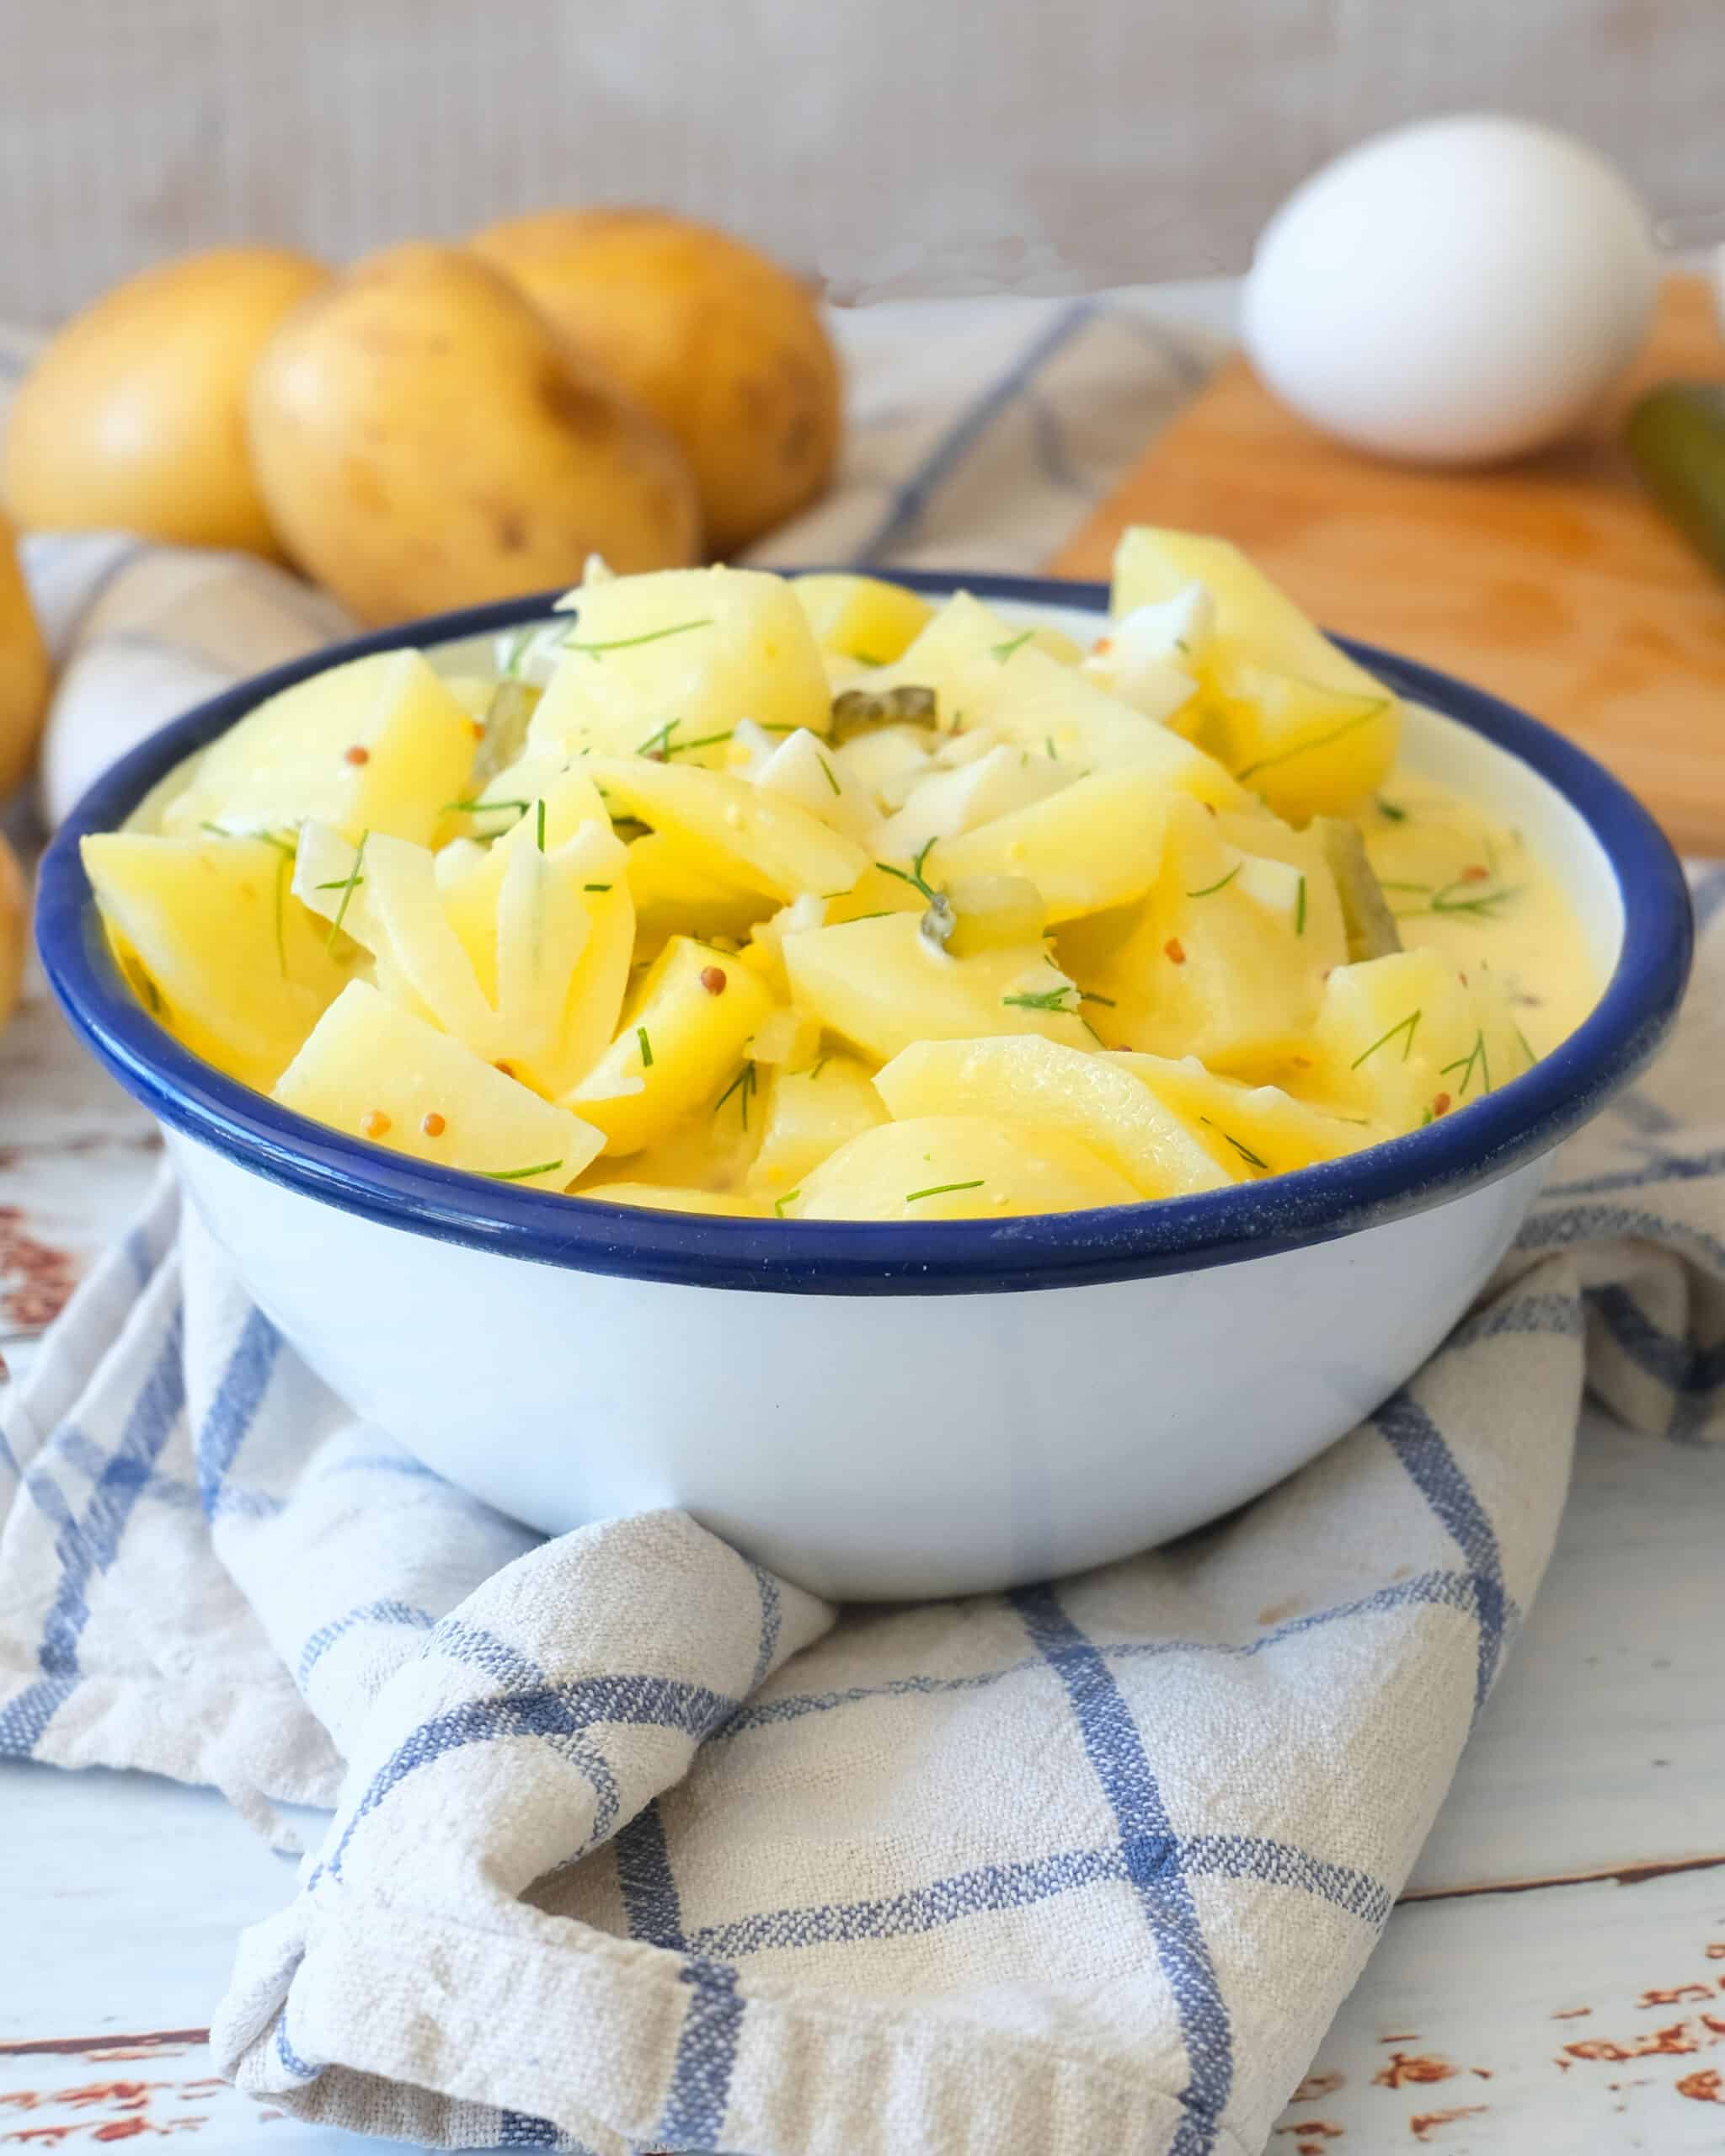 German potato salad in blue and white bowl.